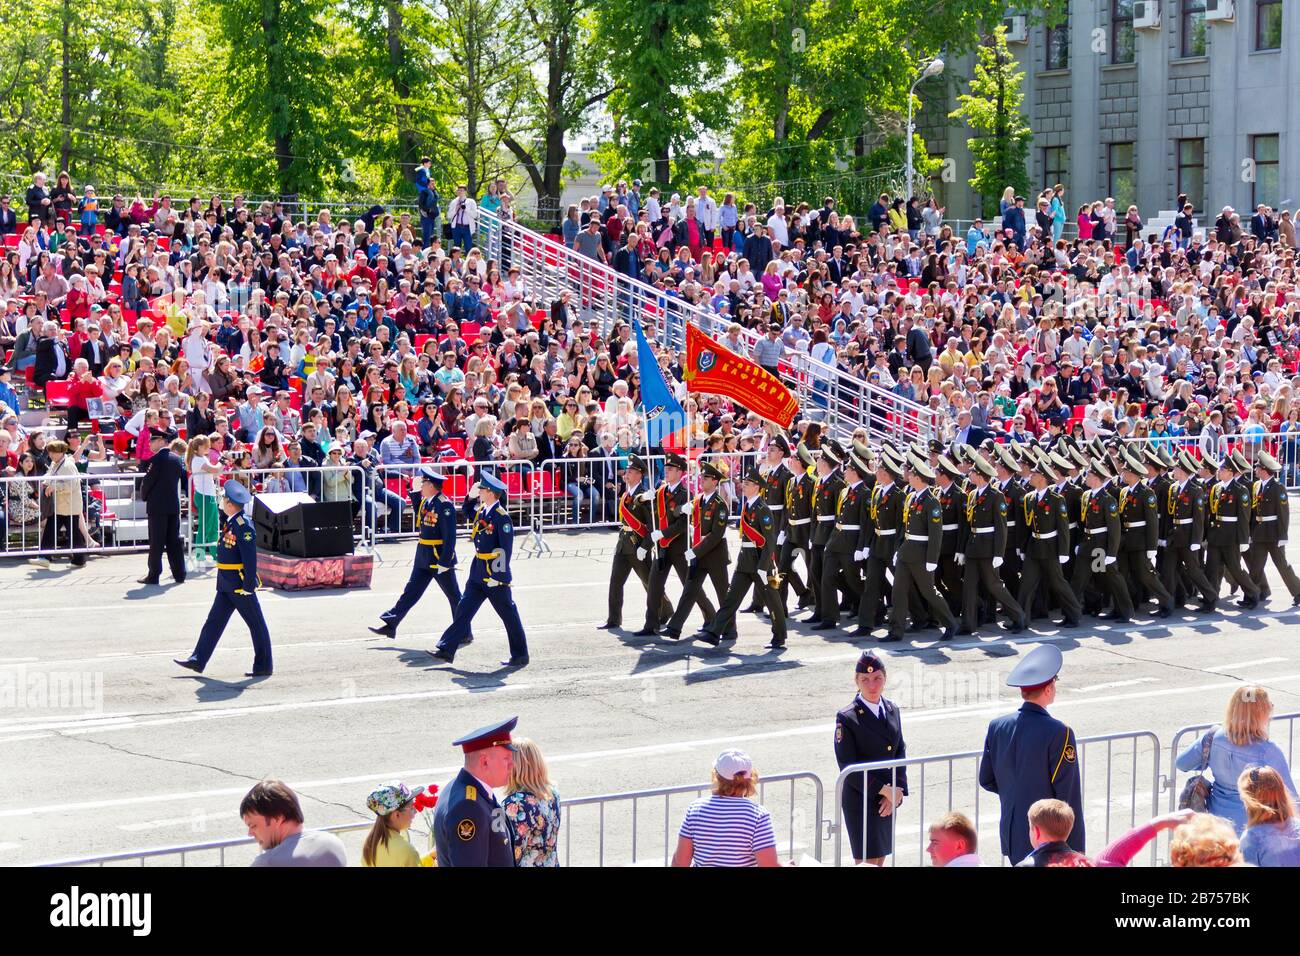 SAMARA, RUSSIA - MAY 9, 2016: Russian soldiers march at the parade on annual Victory Day, May, 9, 2016 in Samara, Russia. Stock Photo